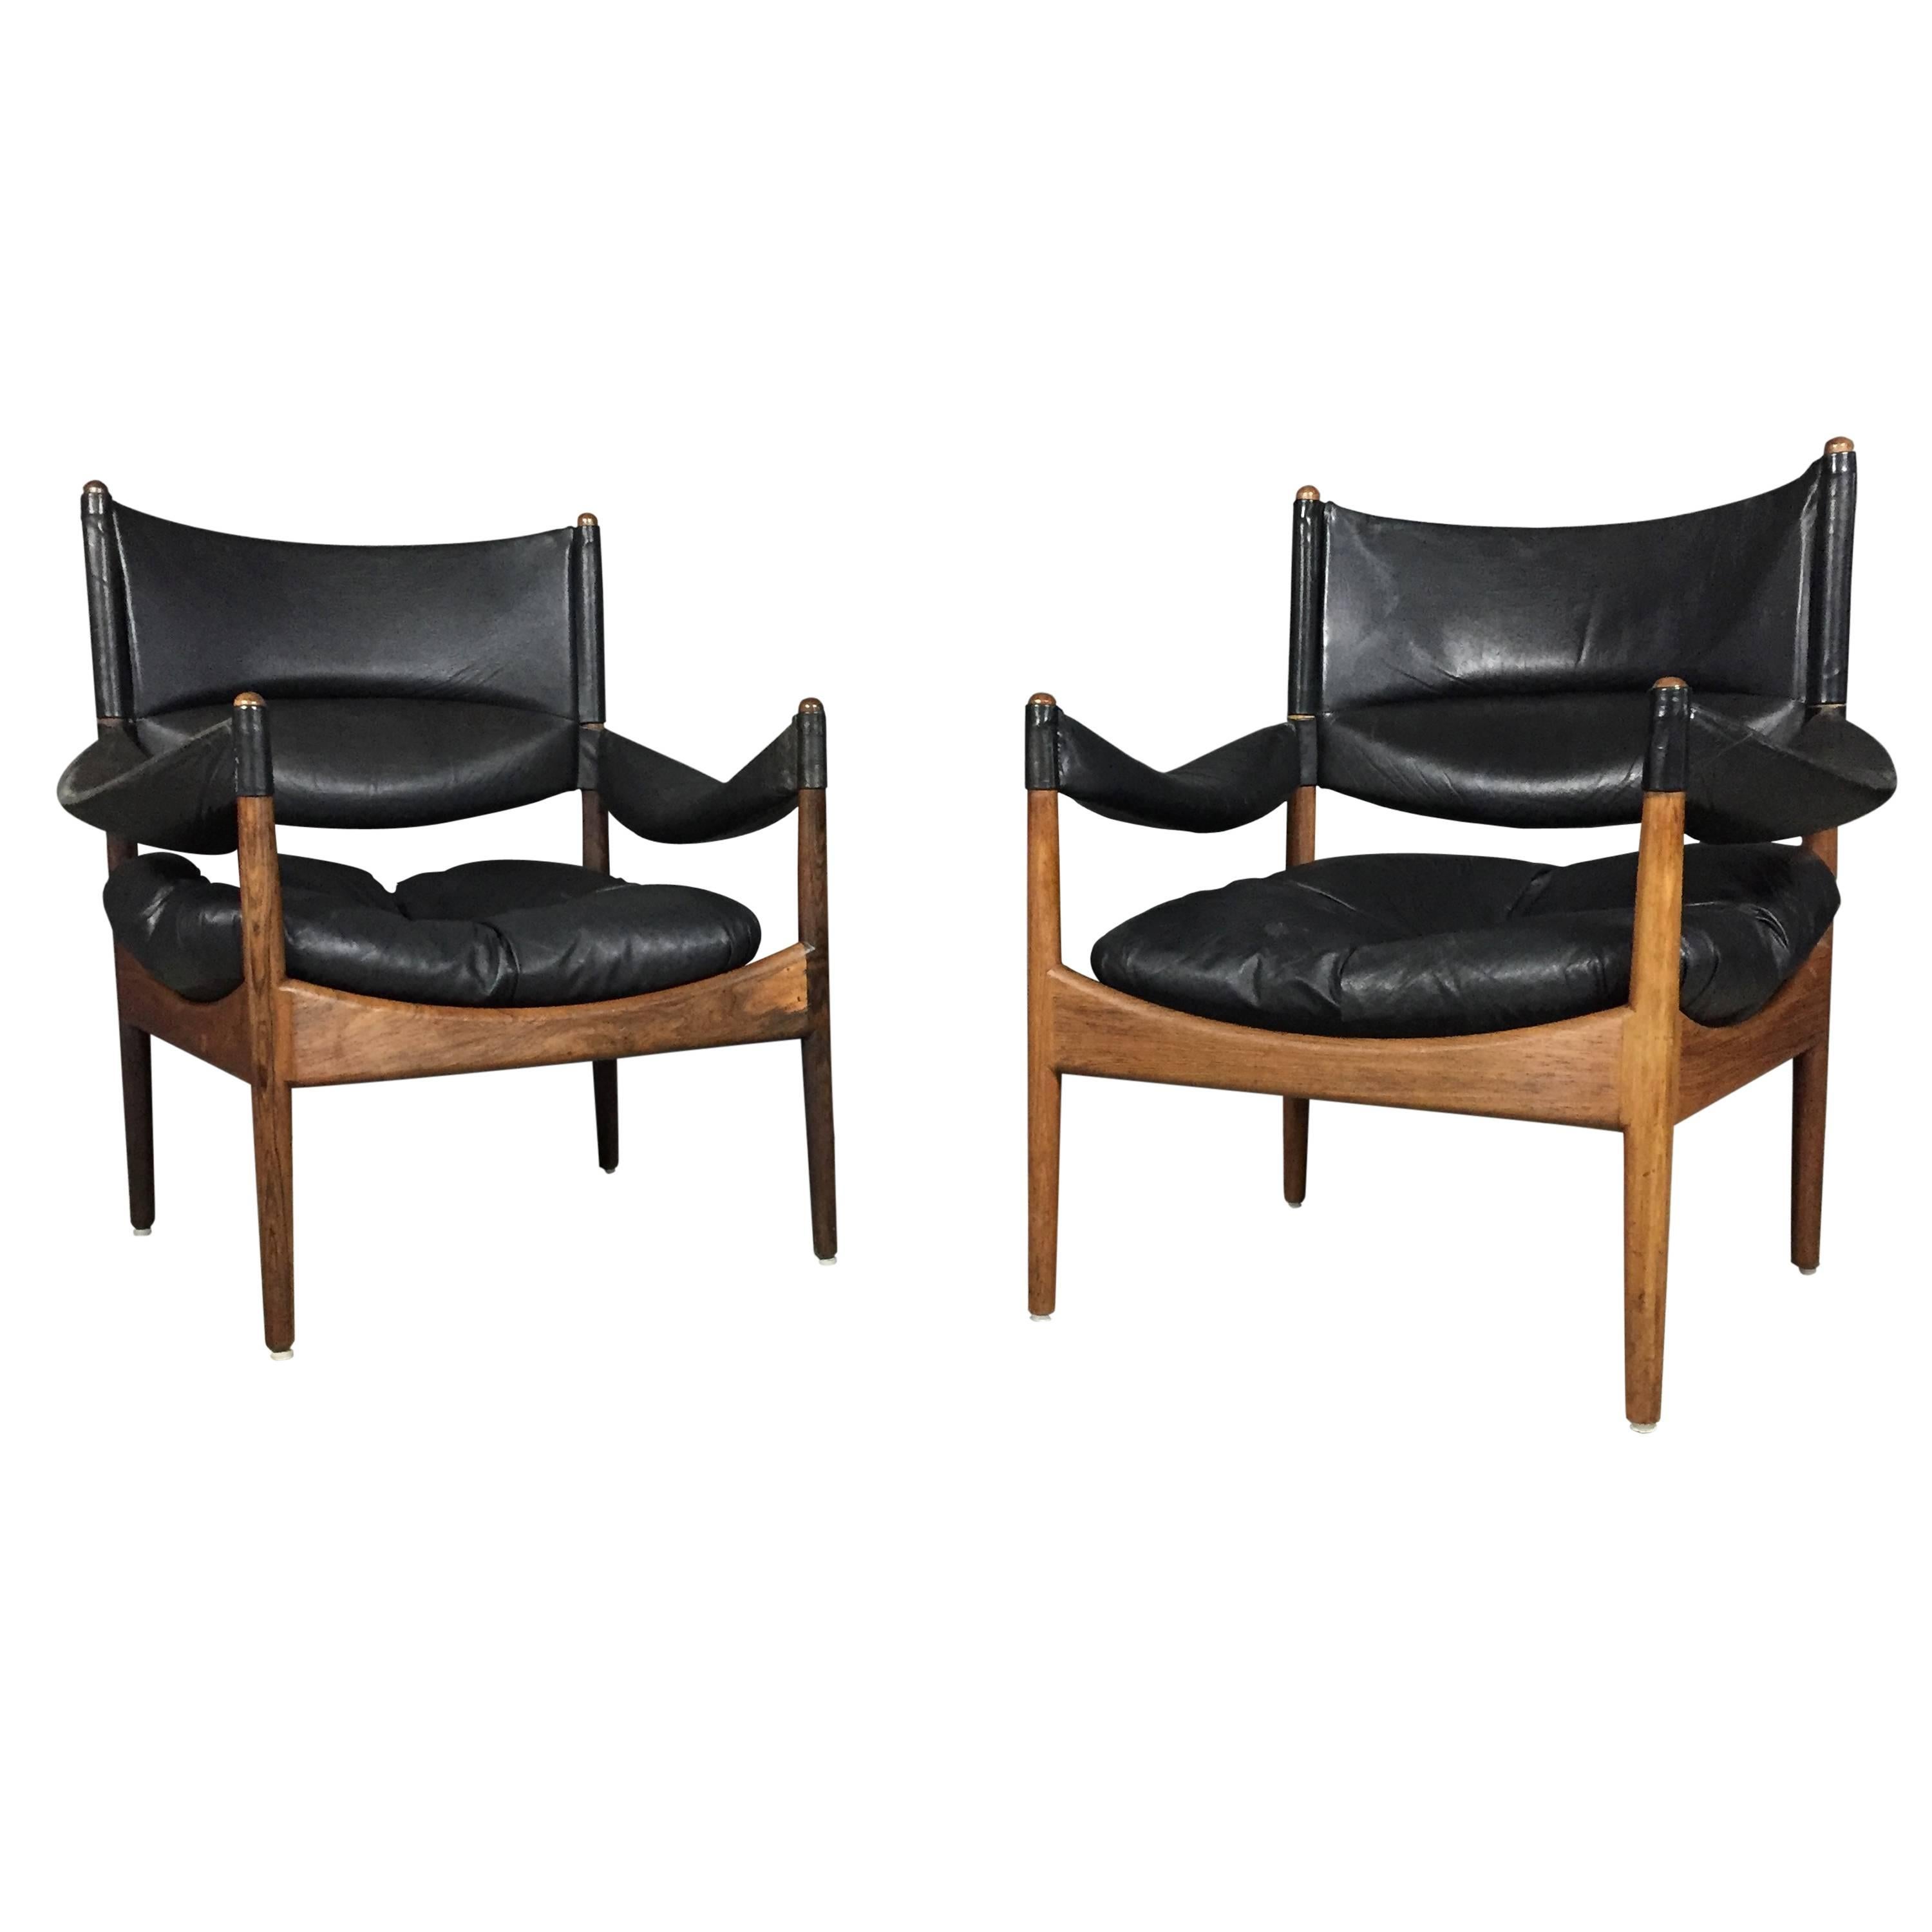 Pair of "Modus" Armchairs, Leather and Rosewood, Kristian Vedel, Denmark, 1960s